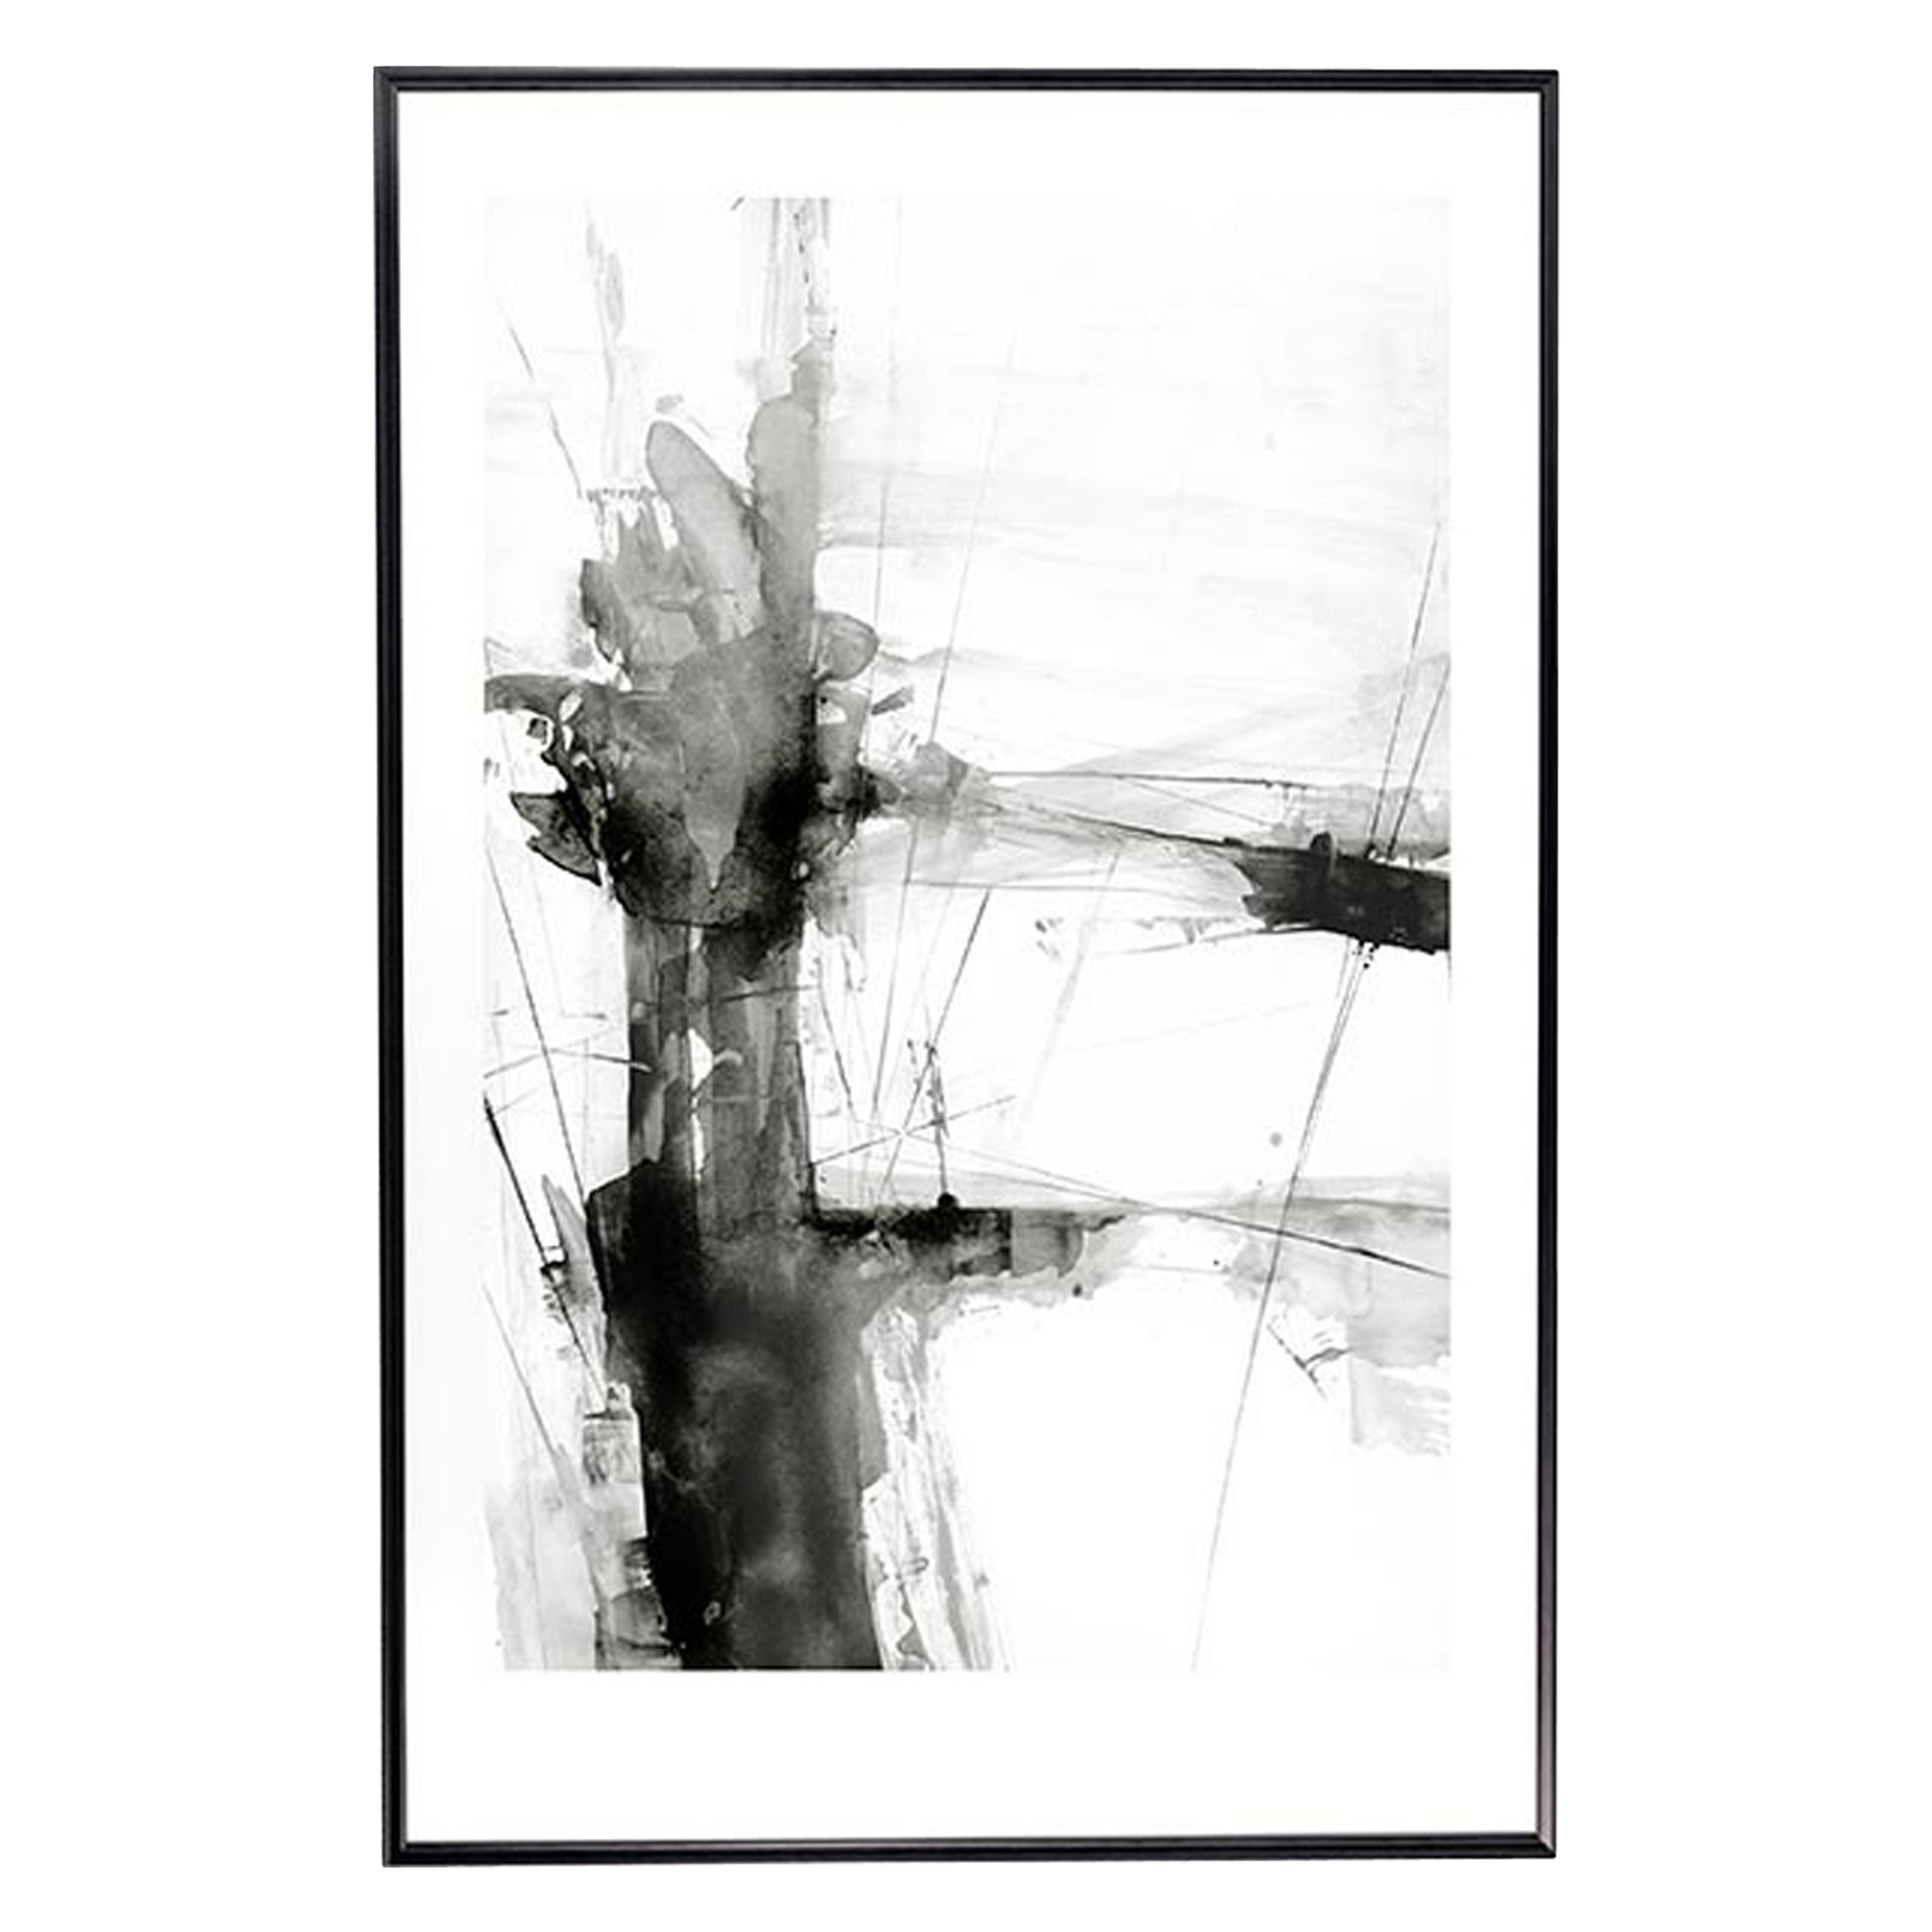 An intriguing black and white abstract piece capturing modern movement and a minimalist aesthetic.